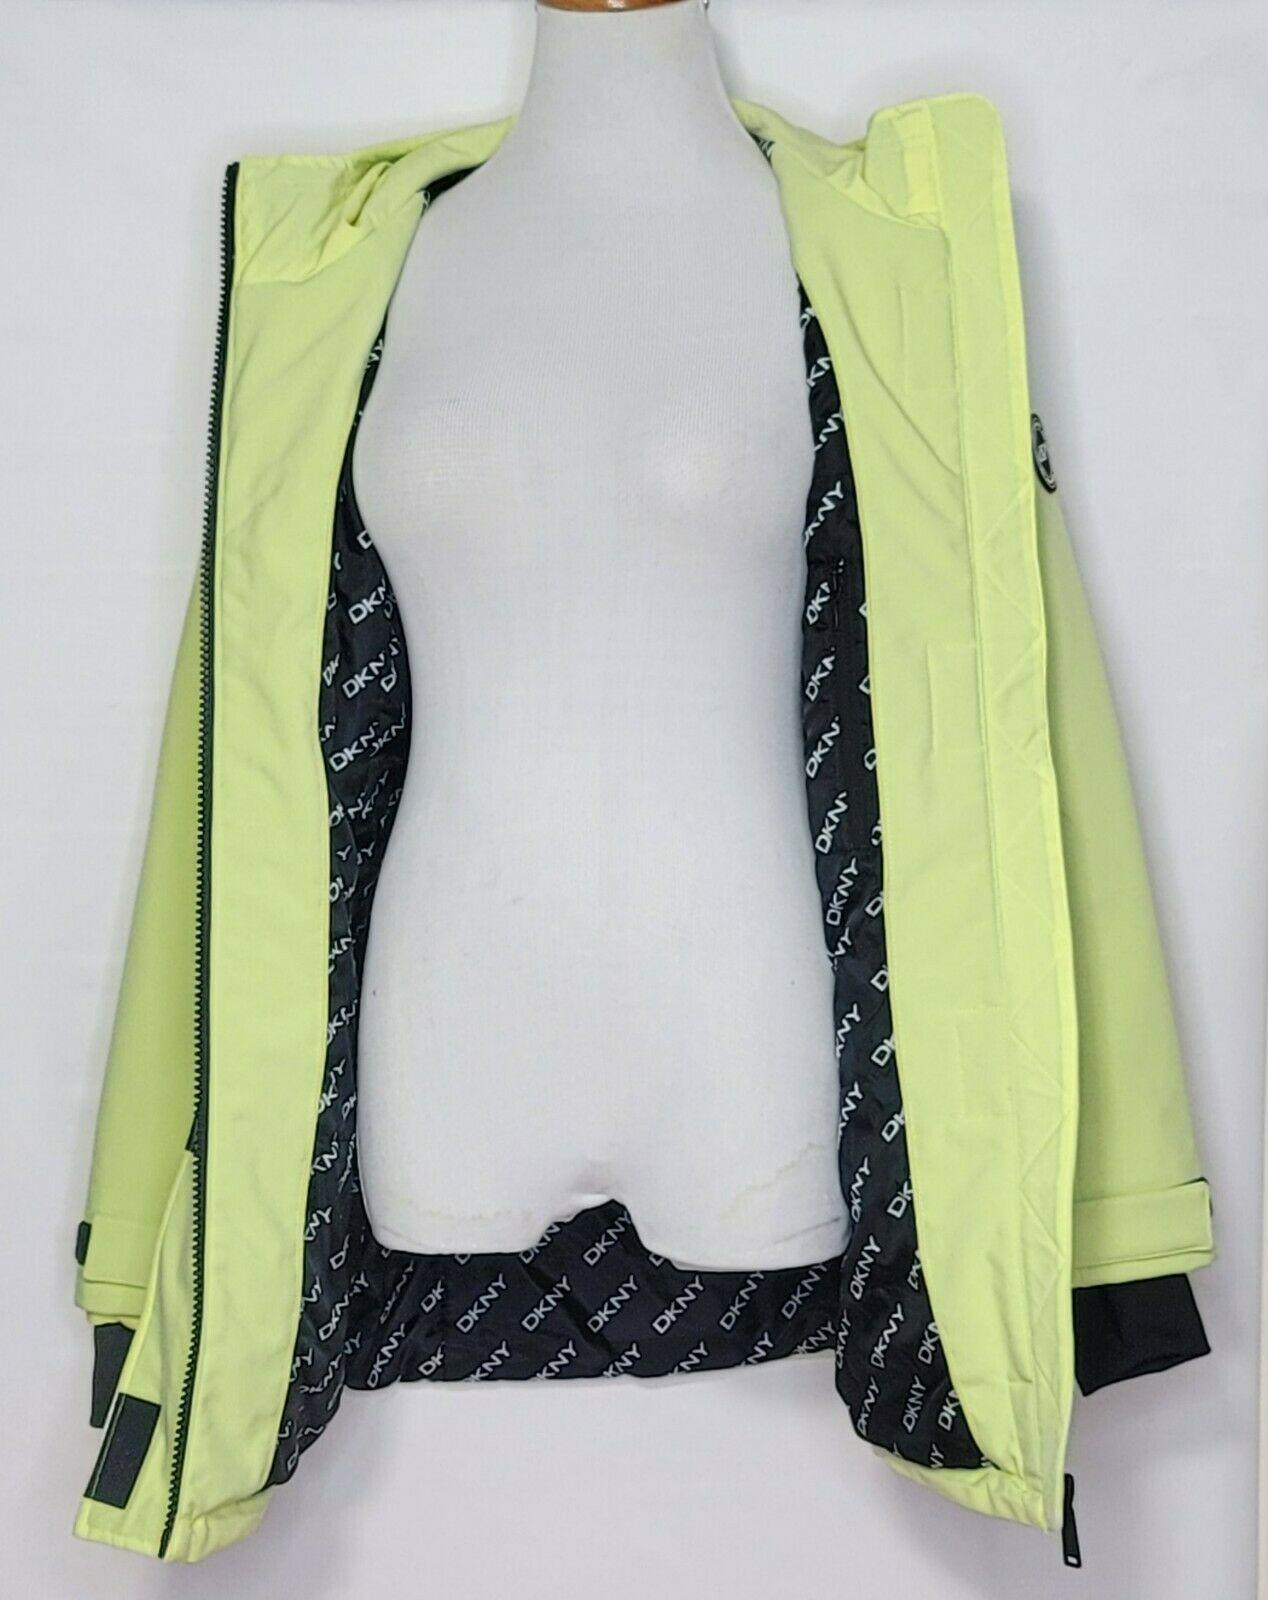 DKNY Sport Hooded Belted Ski Winter Jacket Green Yellow  Size S - SVNYFancy